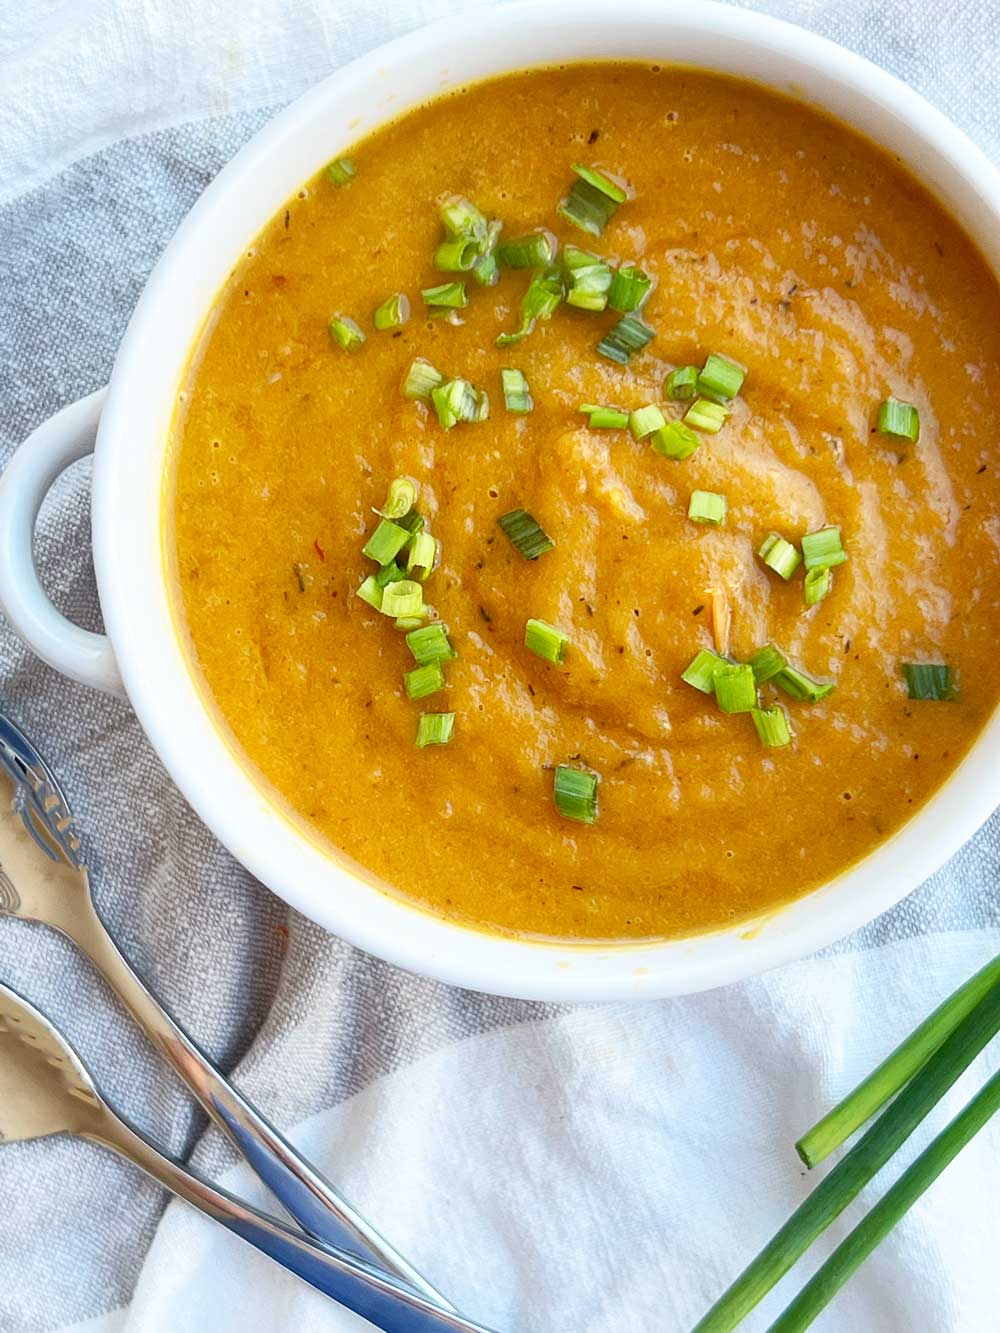 Roasted Carrot Soup Recipe. This is a an easy sheet pan recipe that takes leftover veggies and makes it into soup. Fast recipe with little clean up. Happy Cooking! www.ChopHappy.com #carrotrecipes #carrotsoup